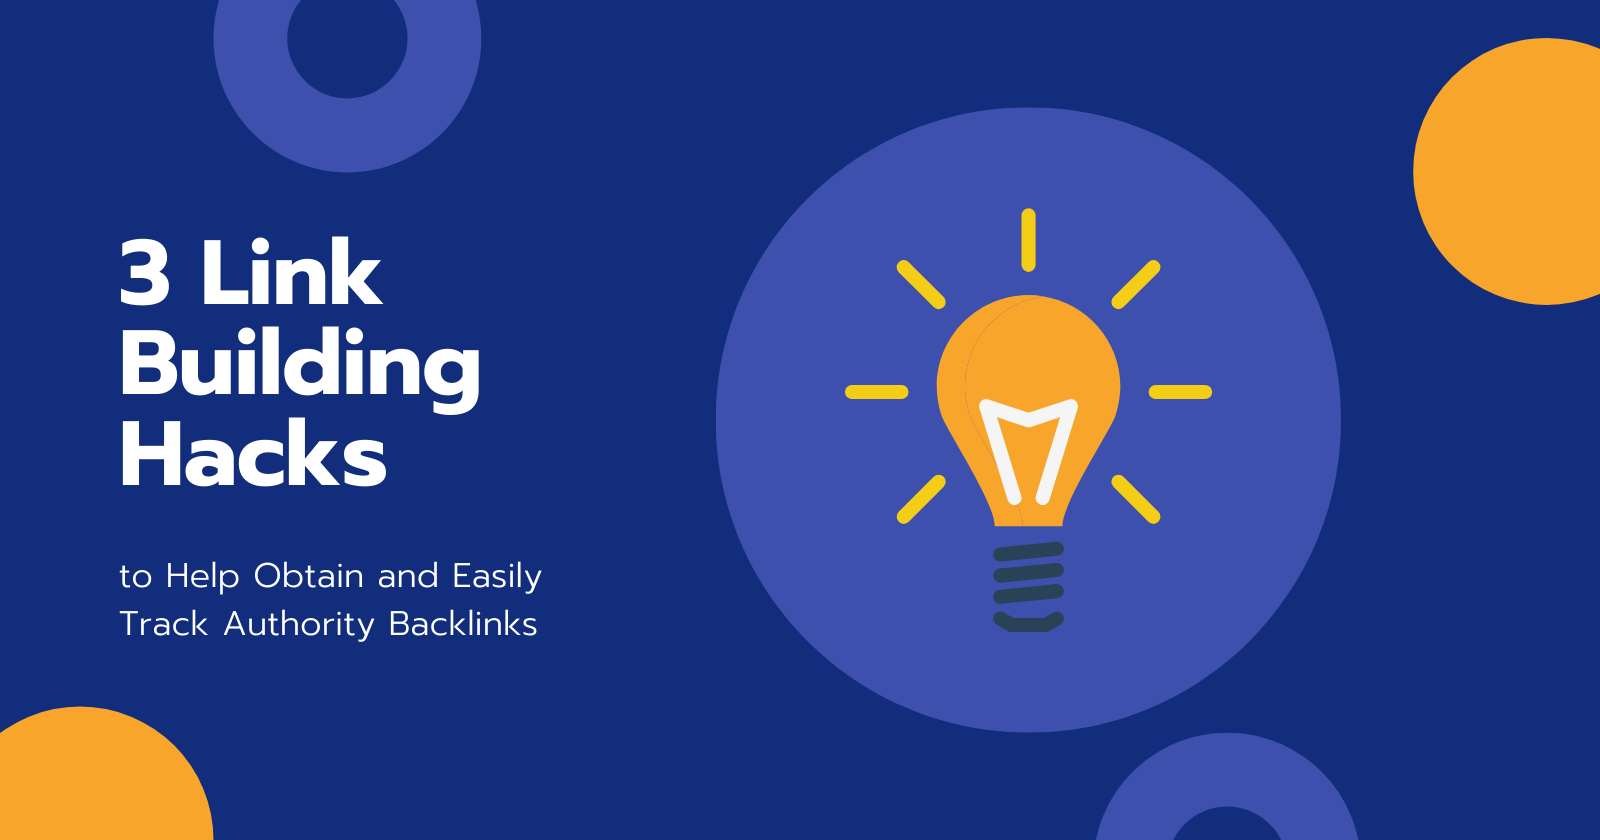 3-link-building-hacks-to-help-obtain-and-easily-track-authority-backlinks-5ed4f98eaccee.png